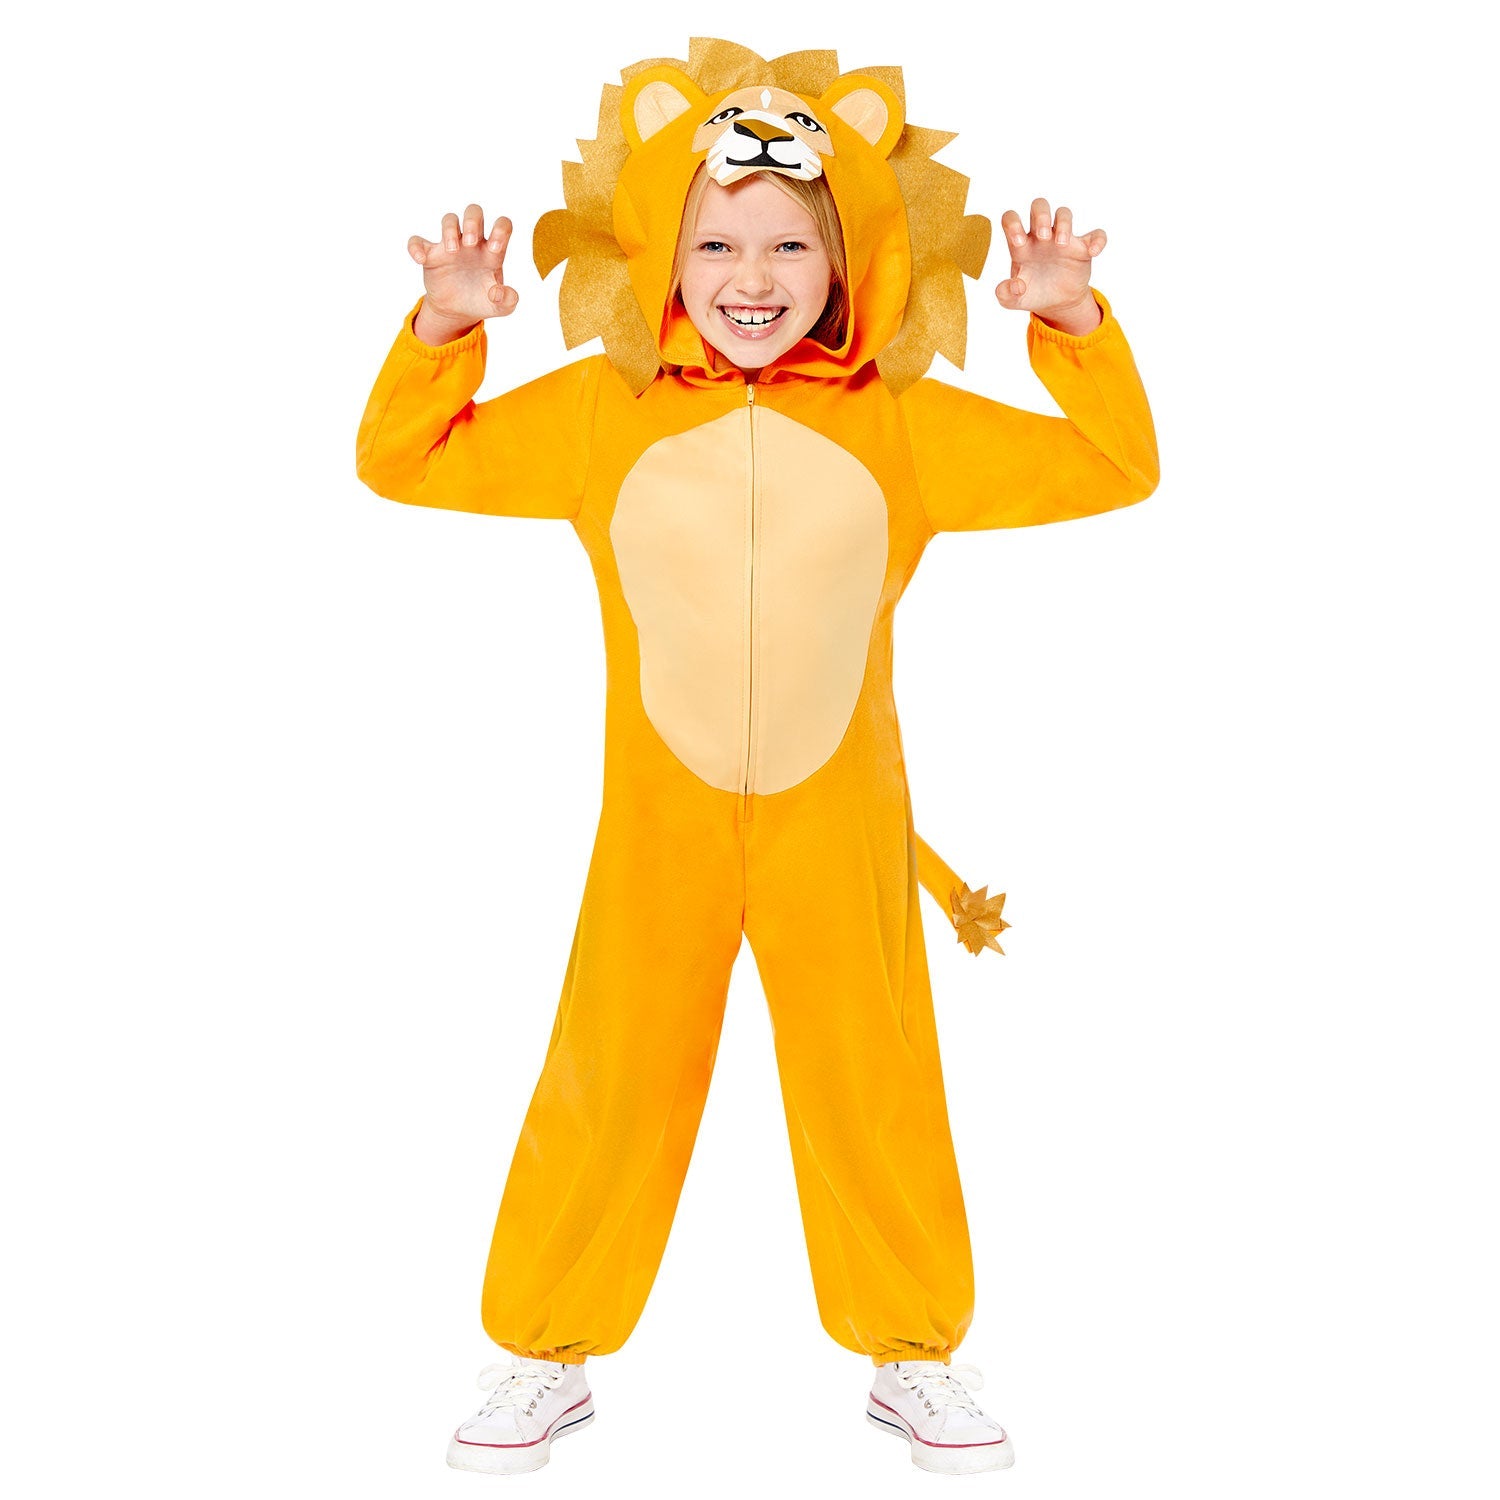 Lion Onesie Costume includes jumpsuit with hood